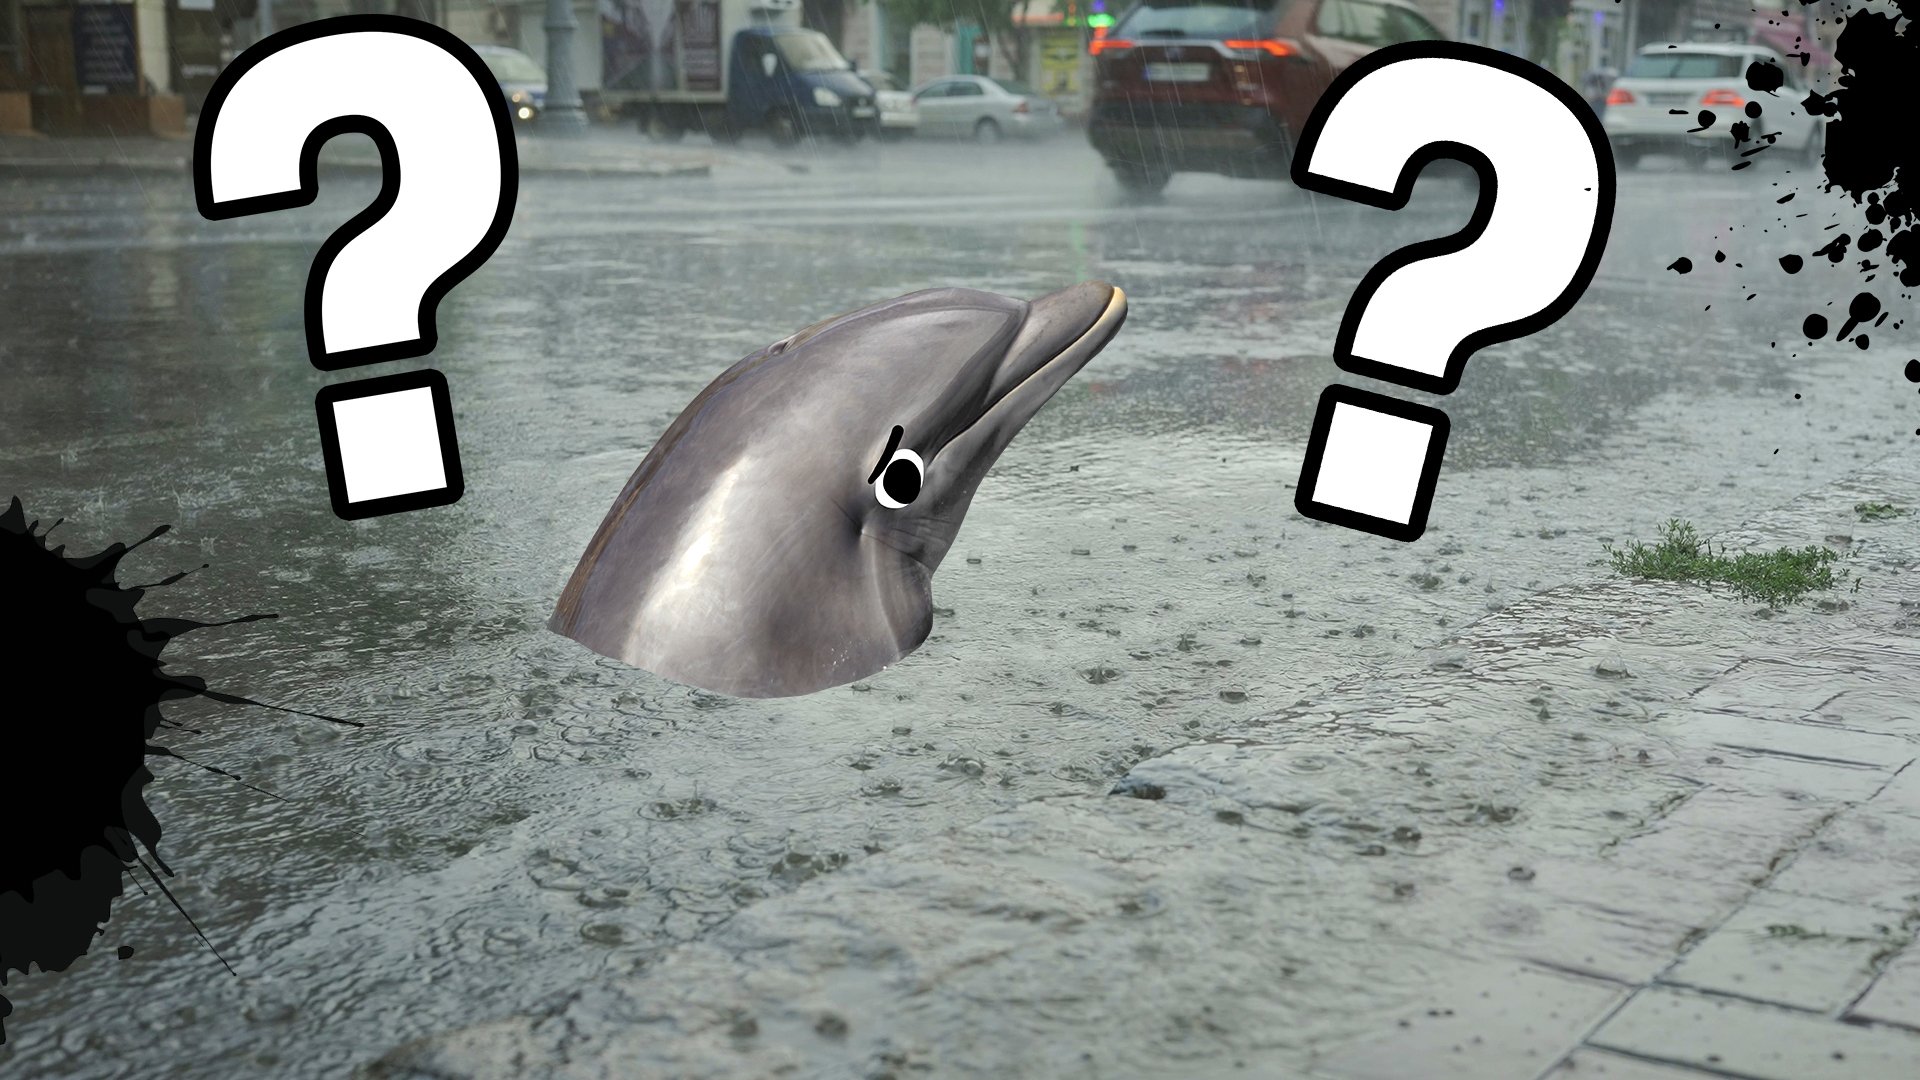 A dolphin in the street